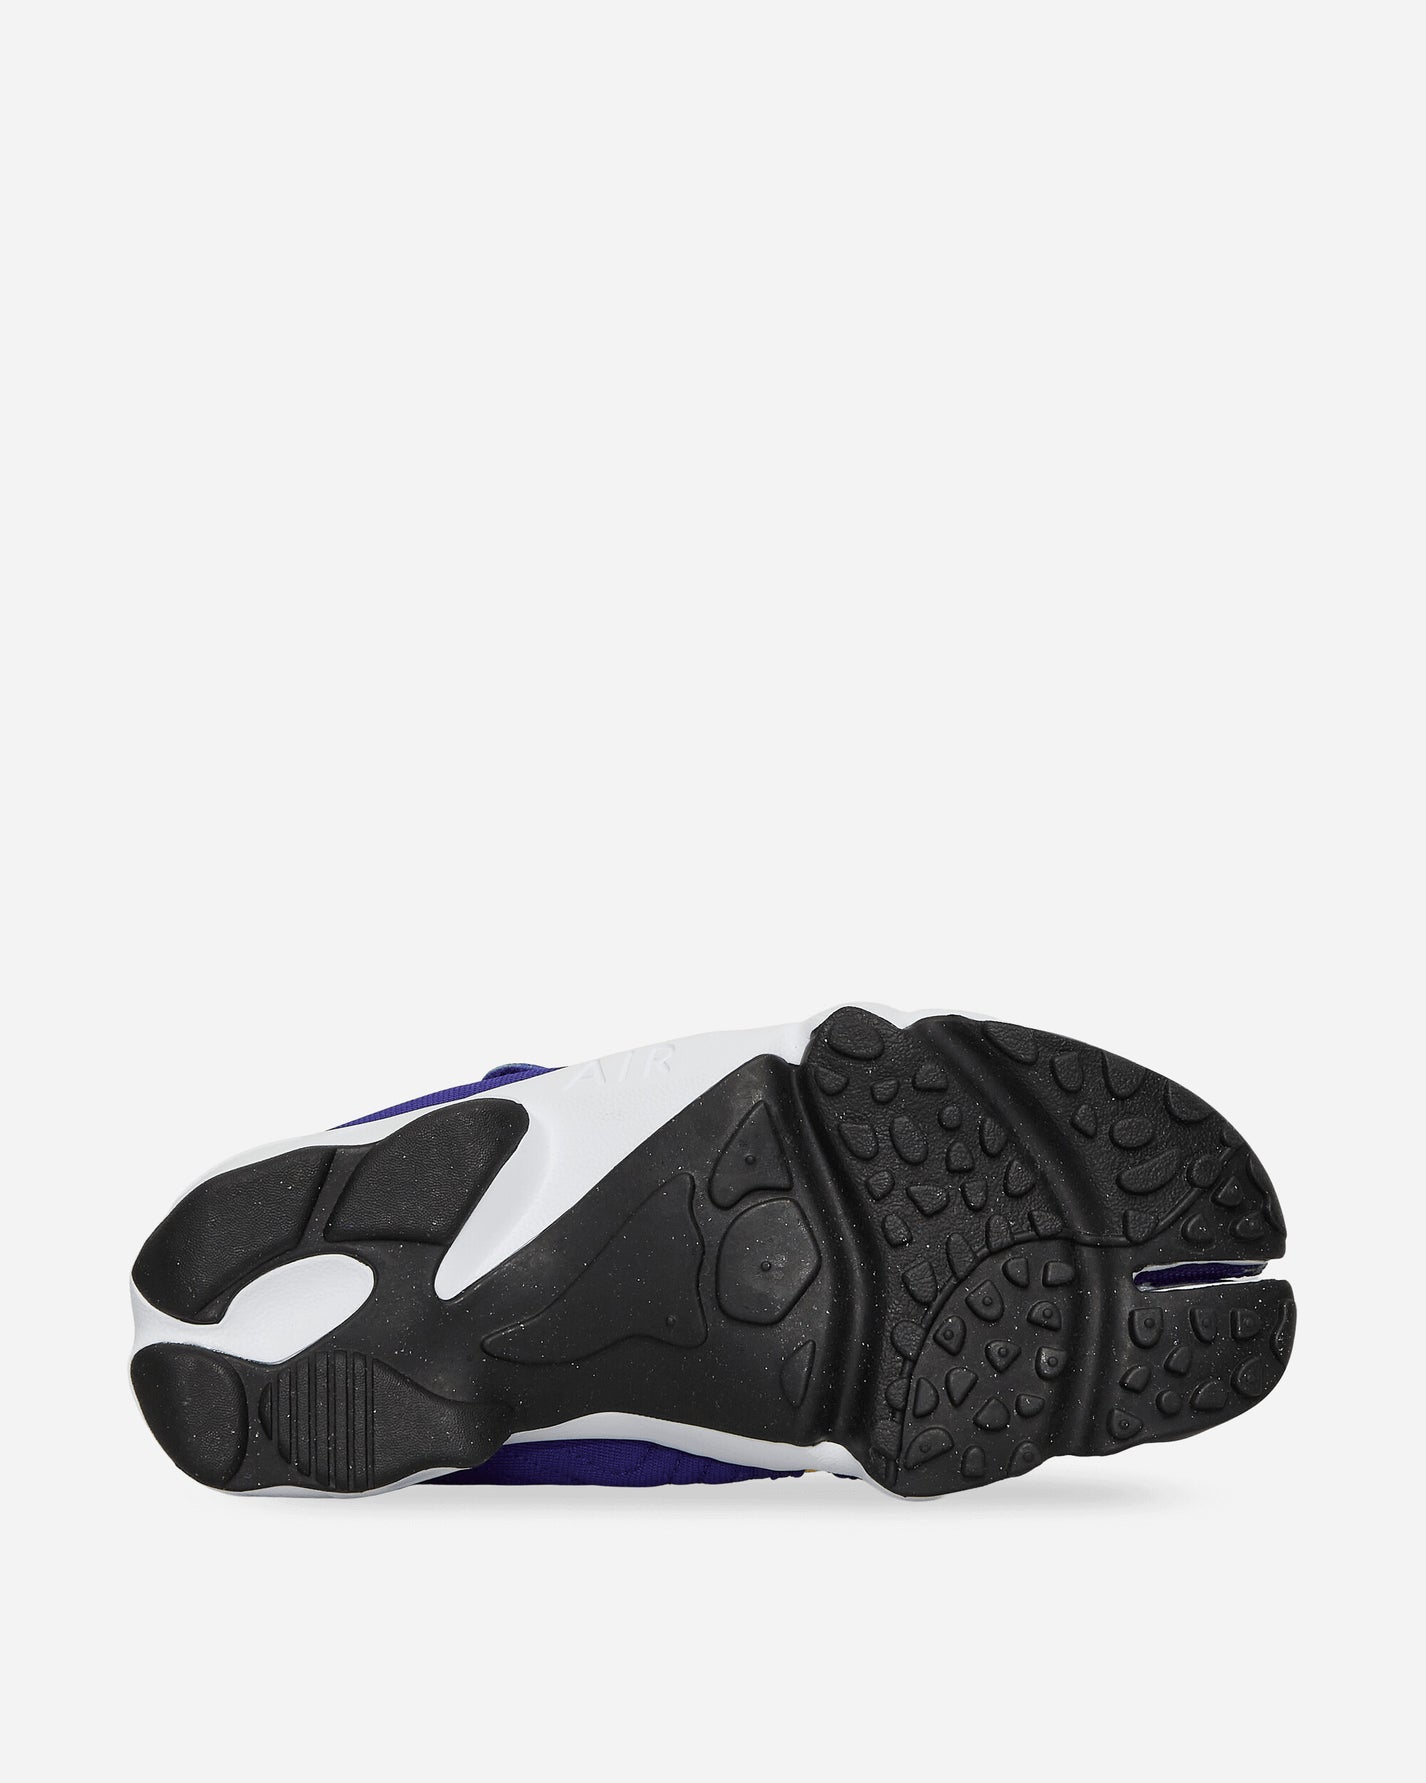 Nike Wmns Wmns Nike Air Rift Br Concord/College Sneakers Mid FZ4749-400